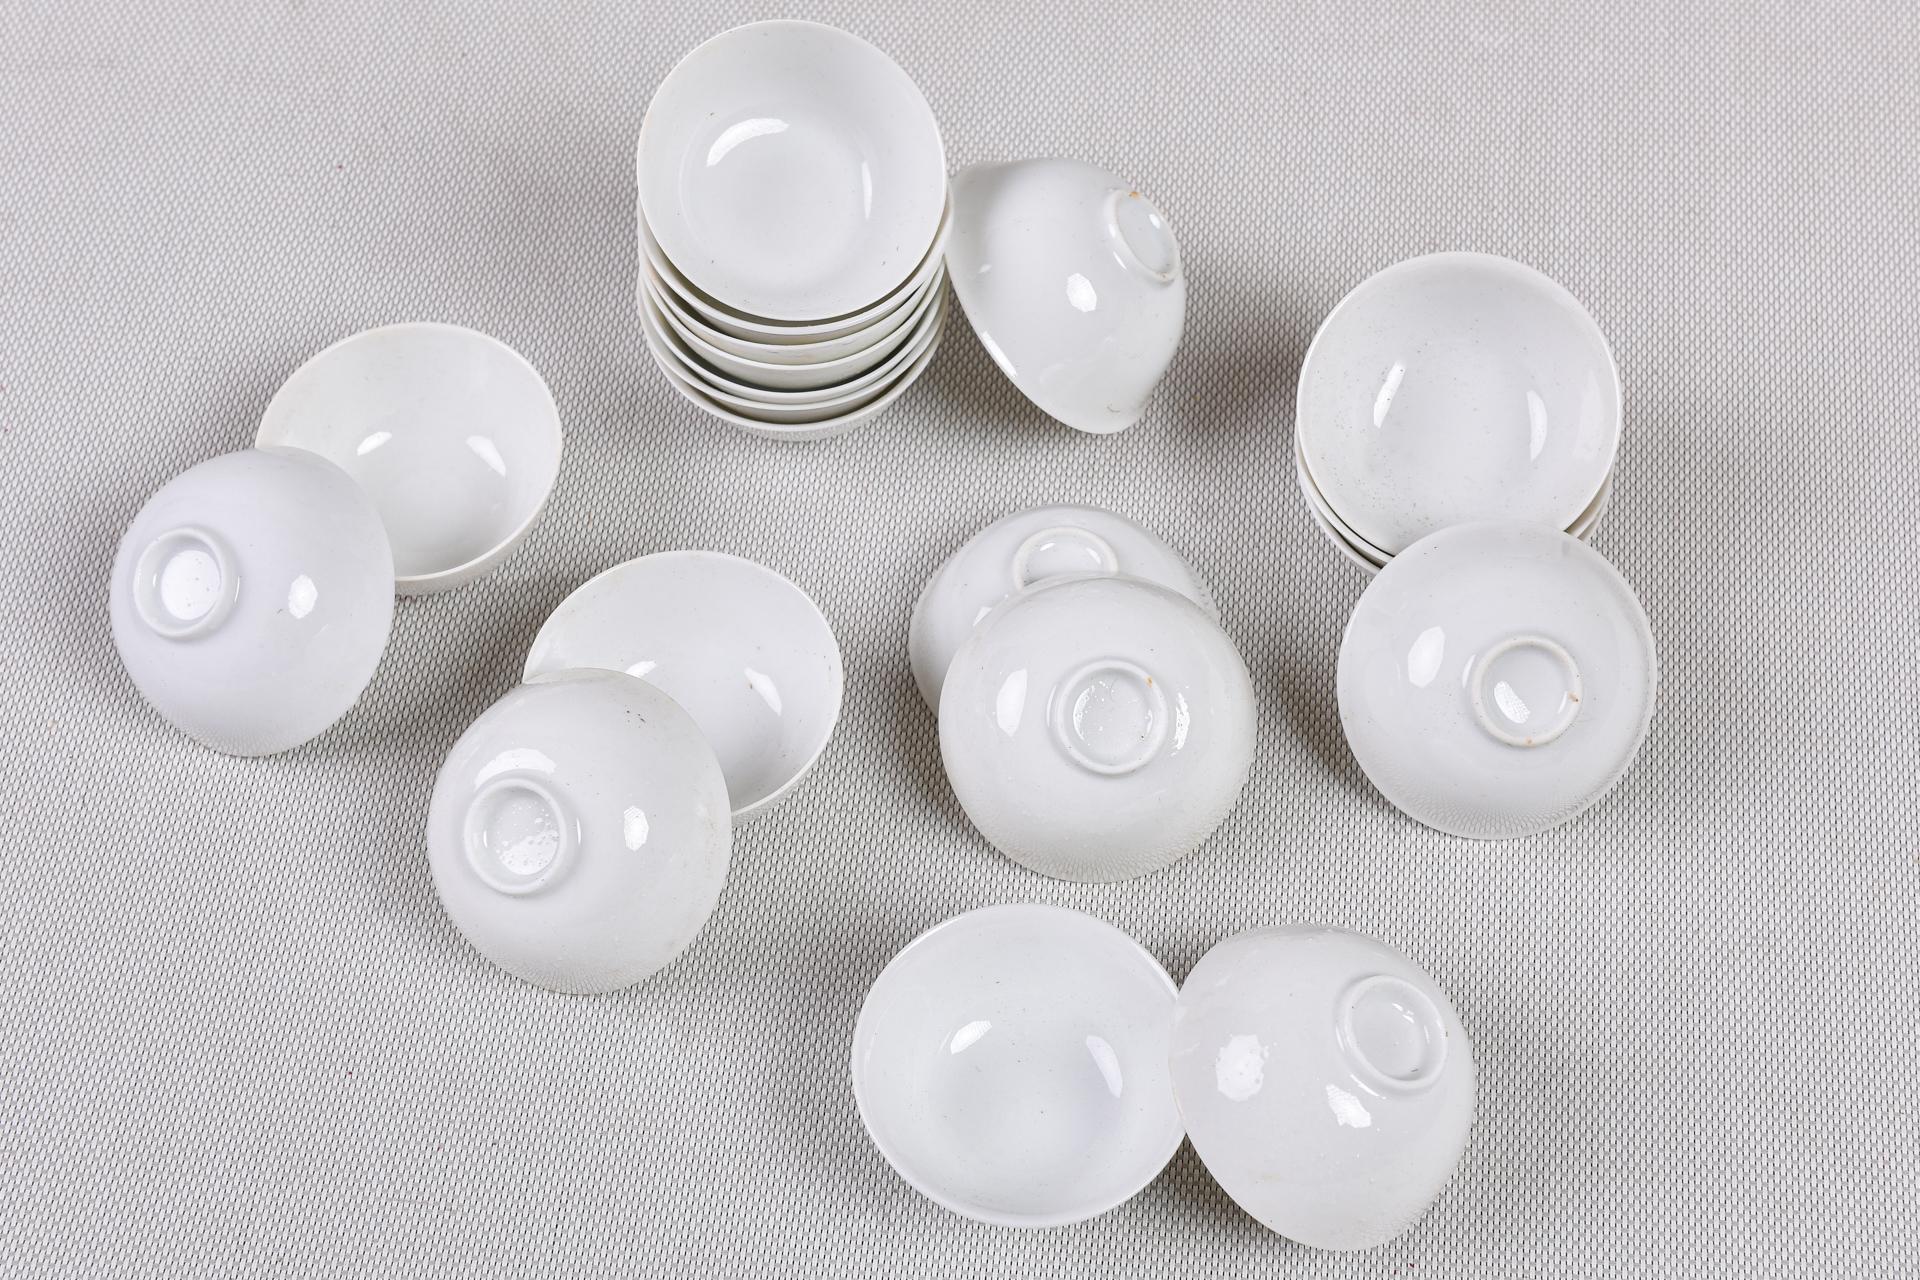 Glazed 180 Small Bowls in Very Fine White Porcelain For Sale